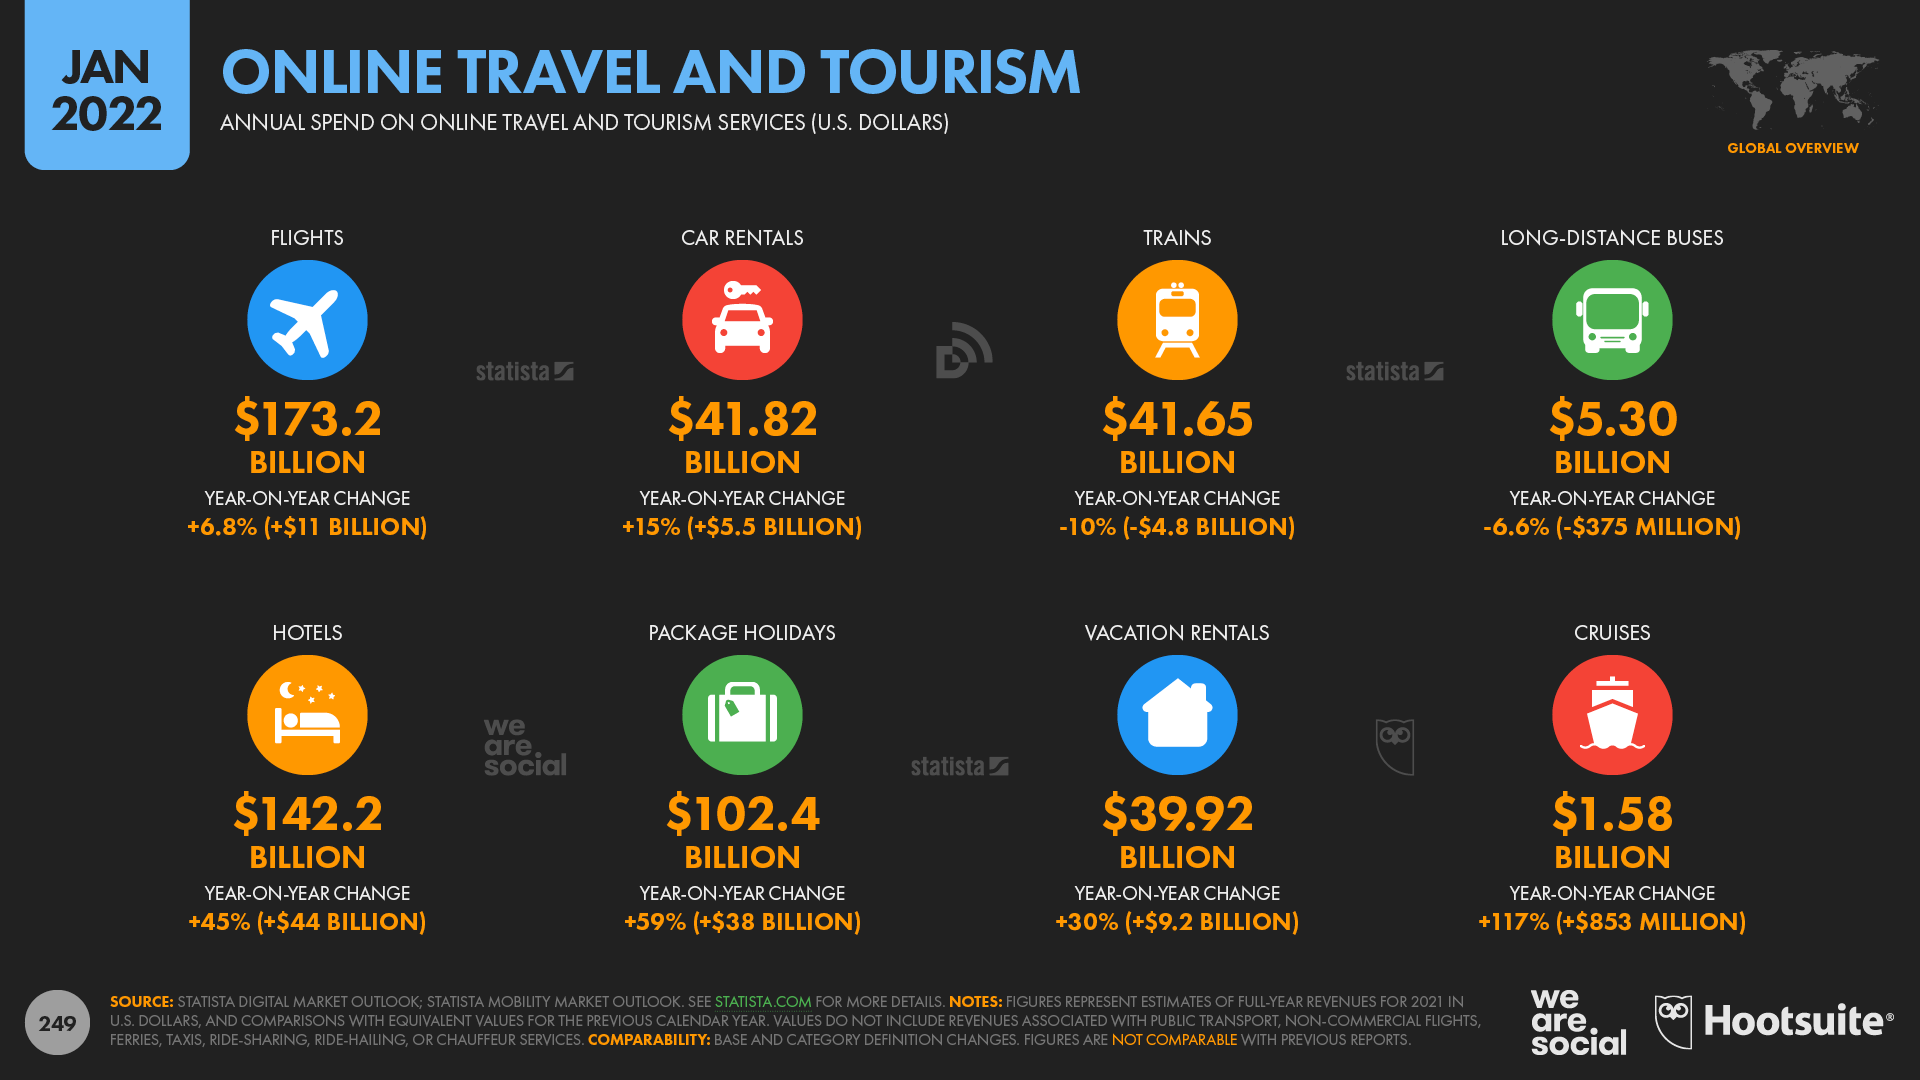 Online travel and tourism